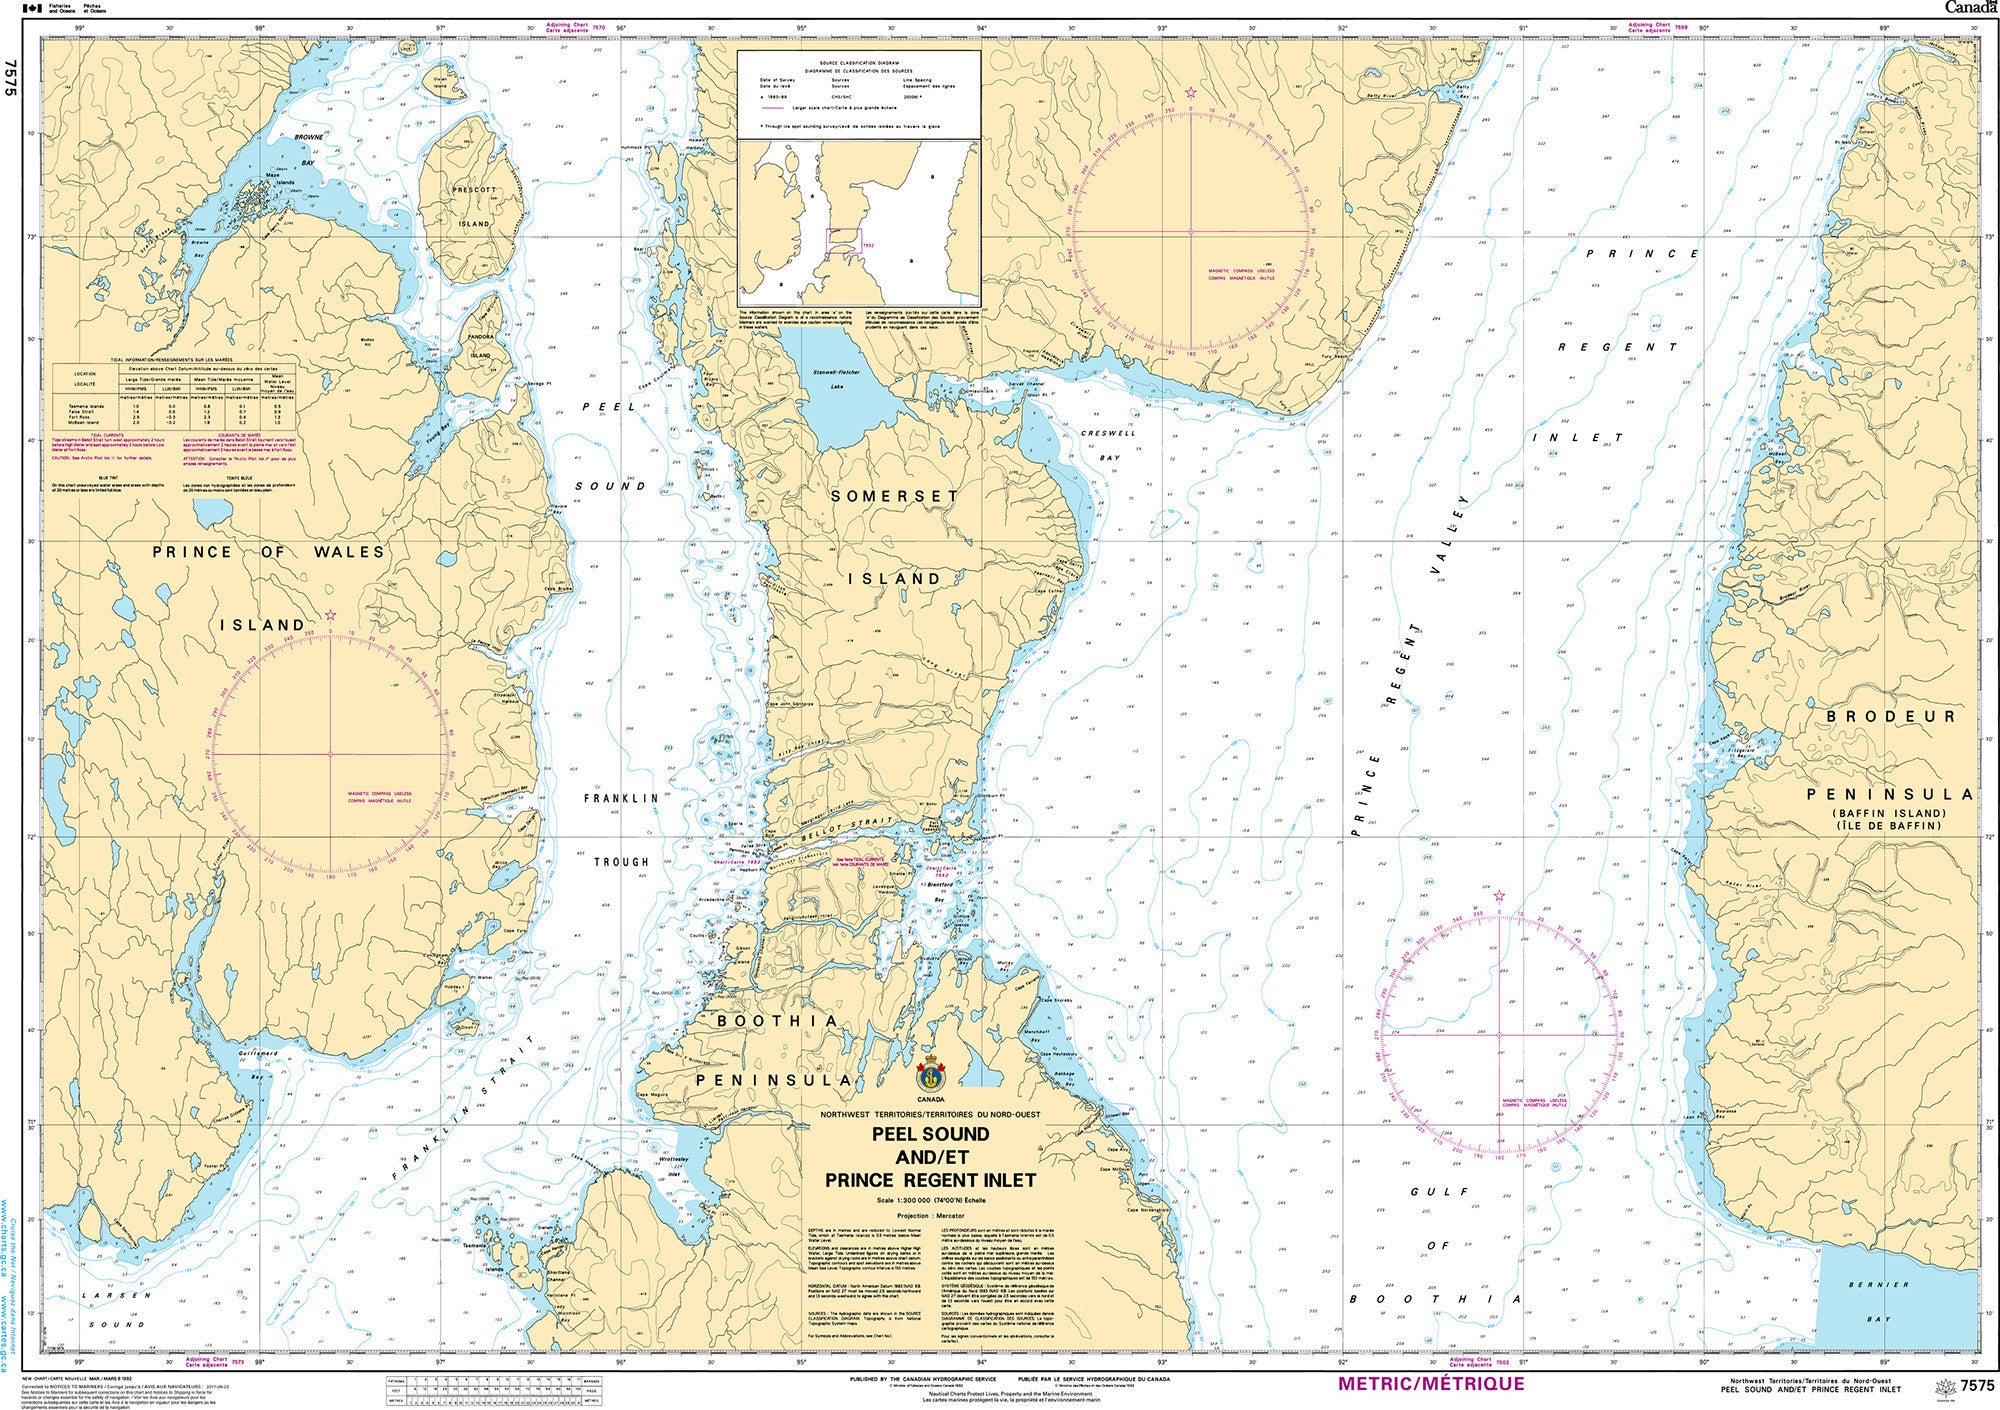 Canadian Hydrographic Service Nautical Chart CHS7575: Peel Sound and/et Prince Regent Inlet